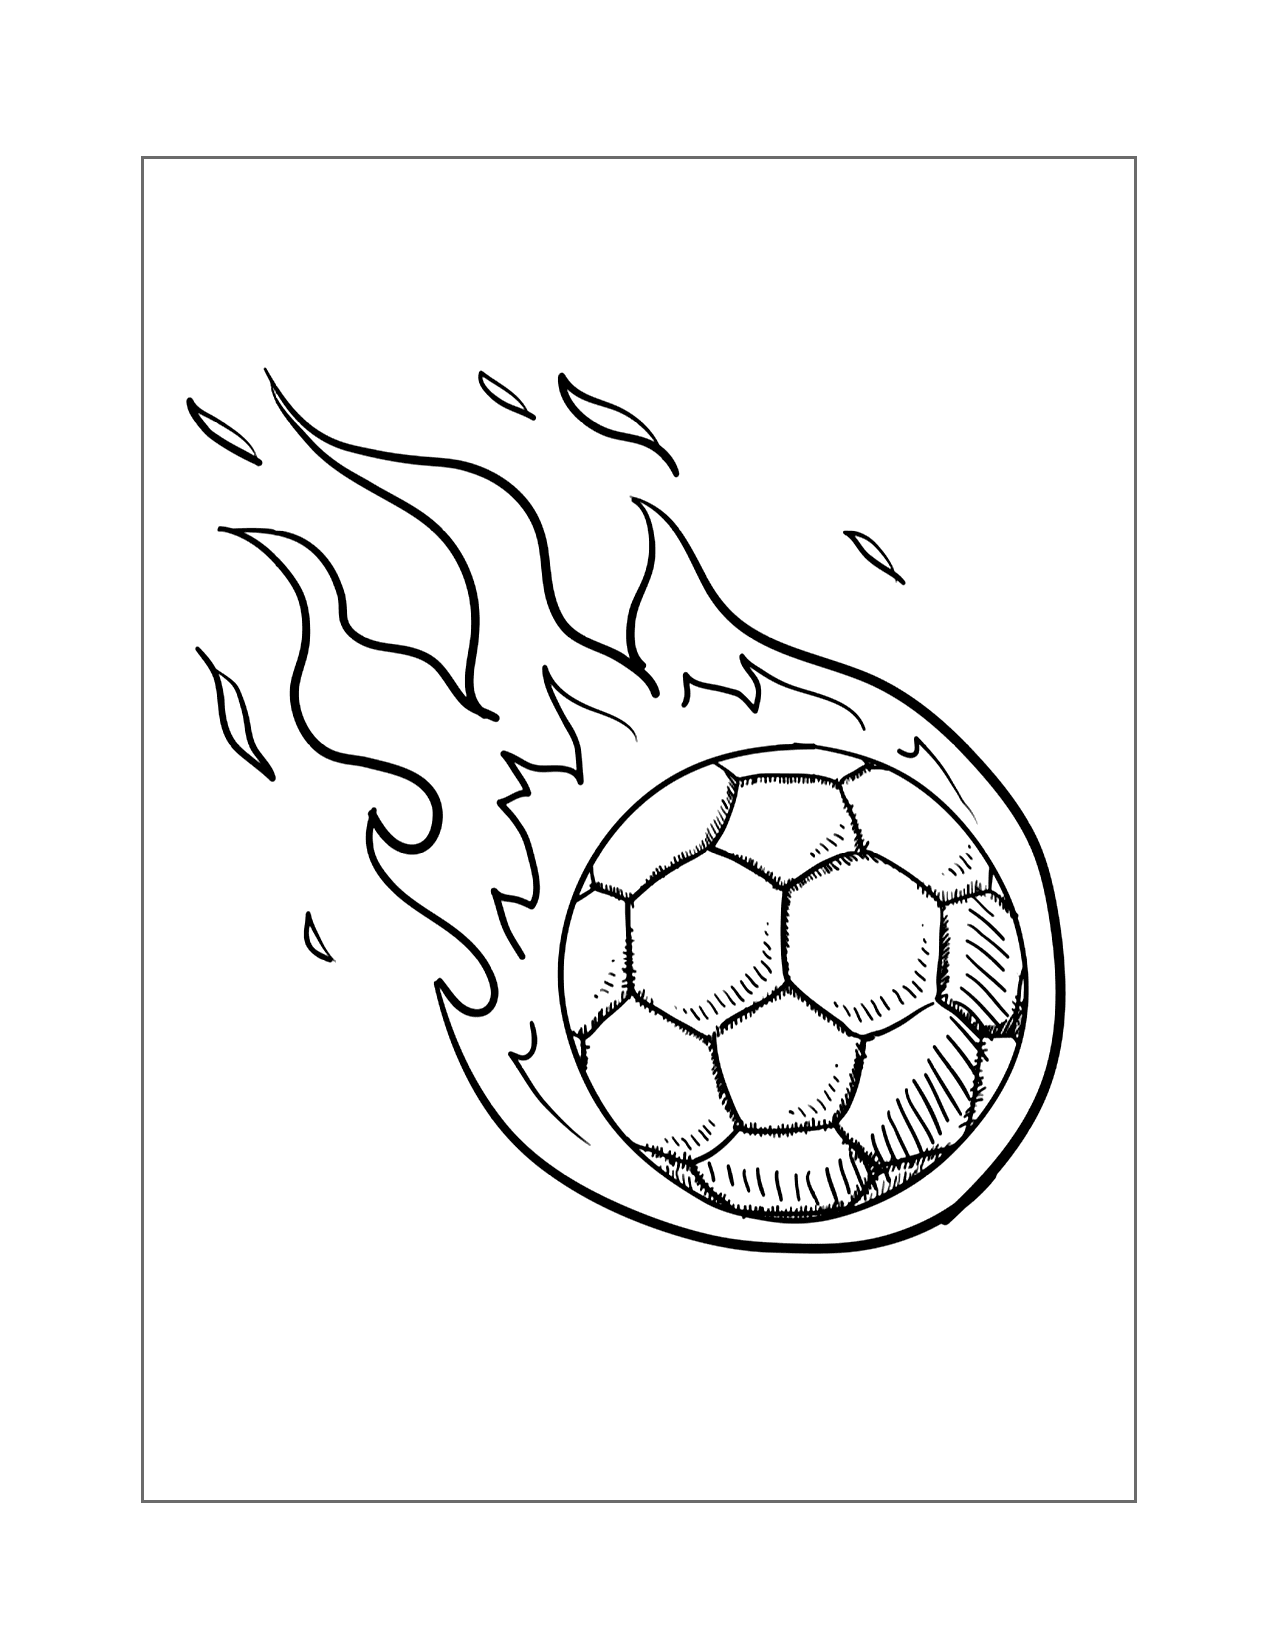 Soccerball On Fire Coloring Page